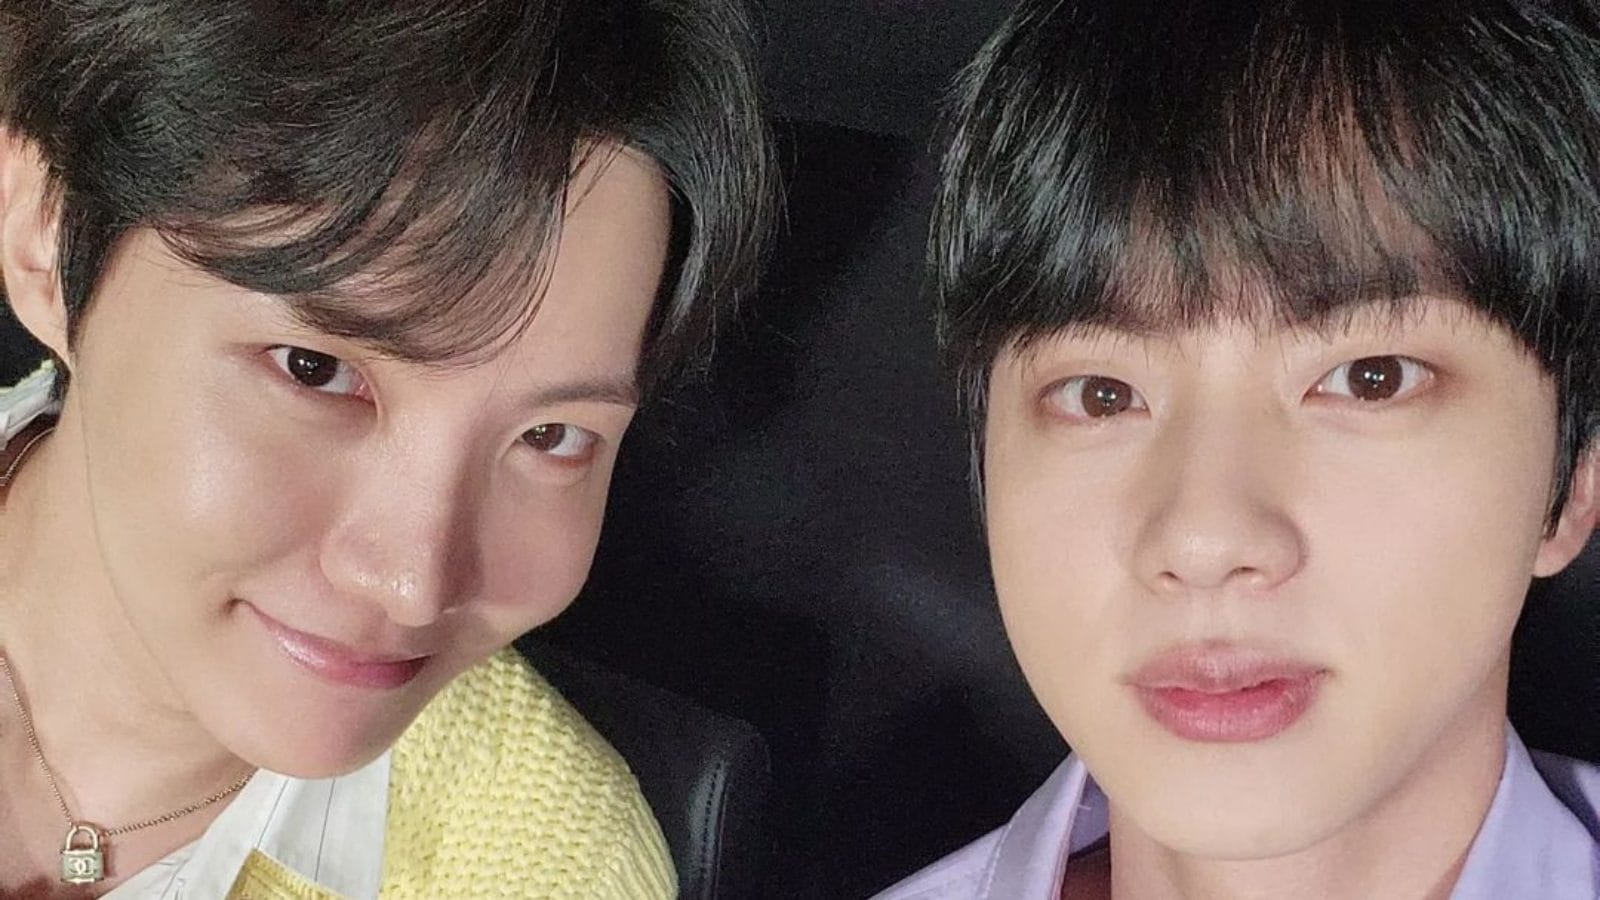 BTS' V drops selfie with Jimin after his surgery, shares photo